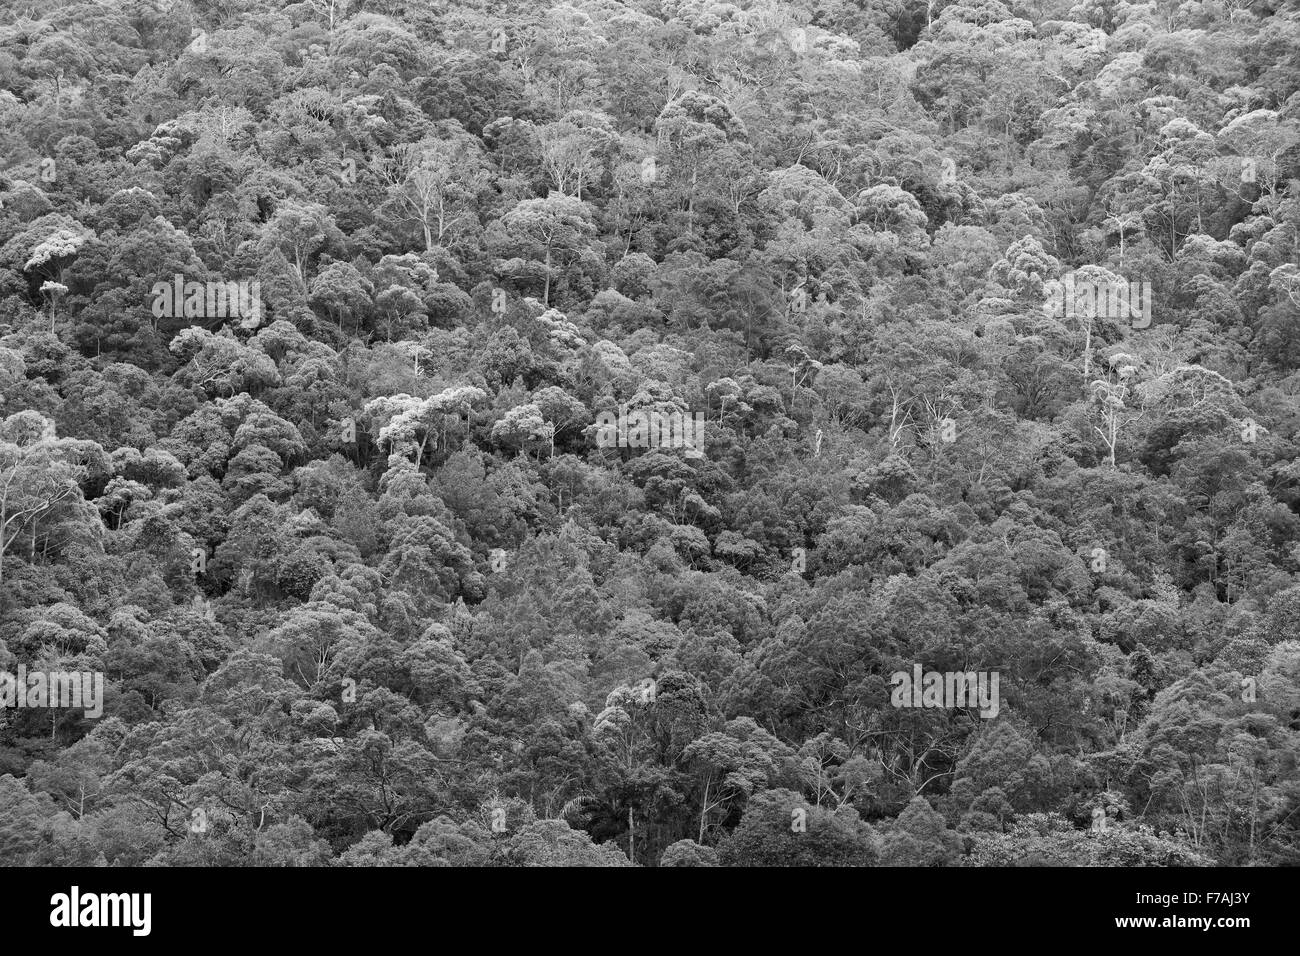 Dense jungle canopy on a steep slope. Monochrome shot of the foliage giving a contrasting natural pattern. Stock Photo